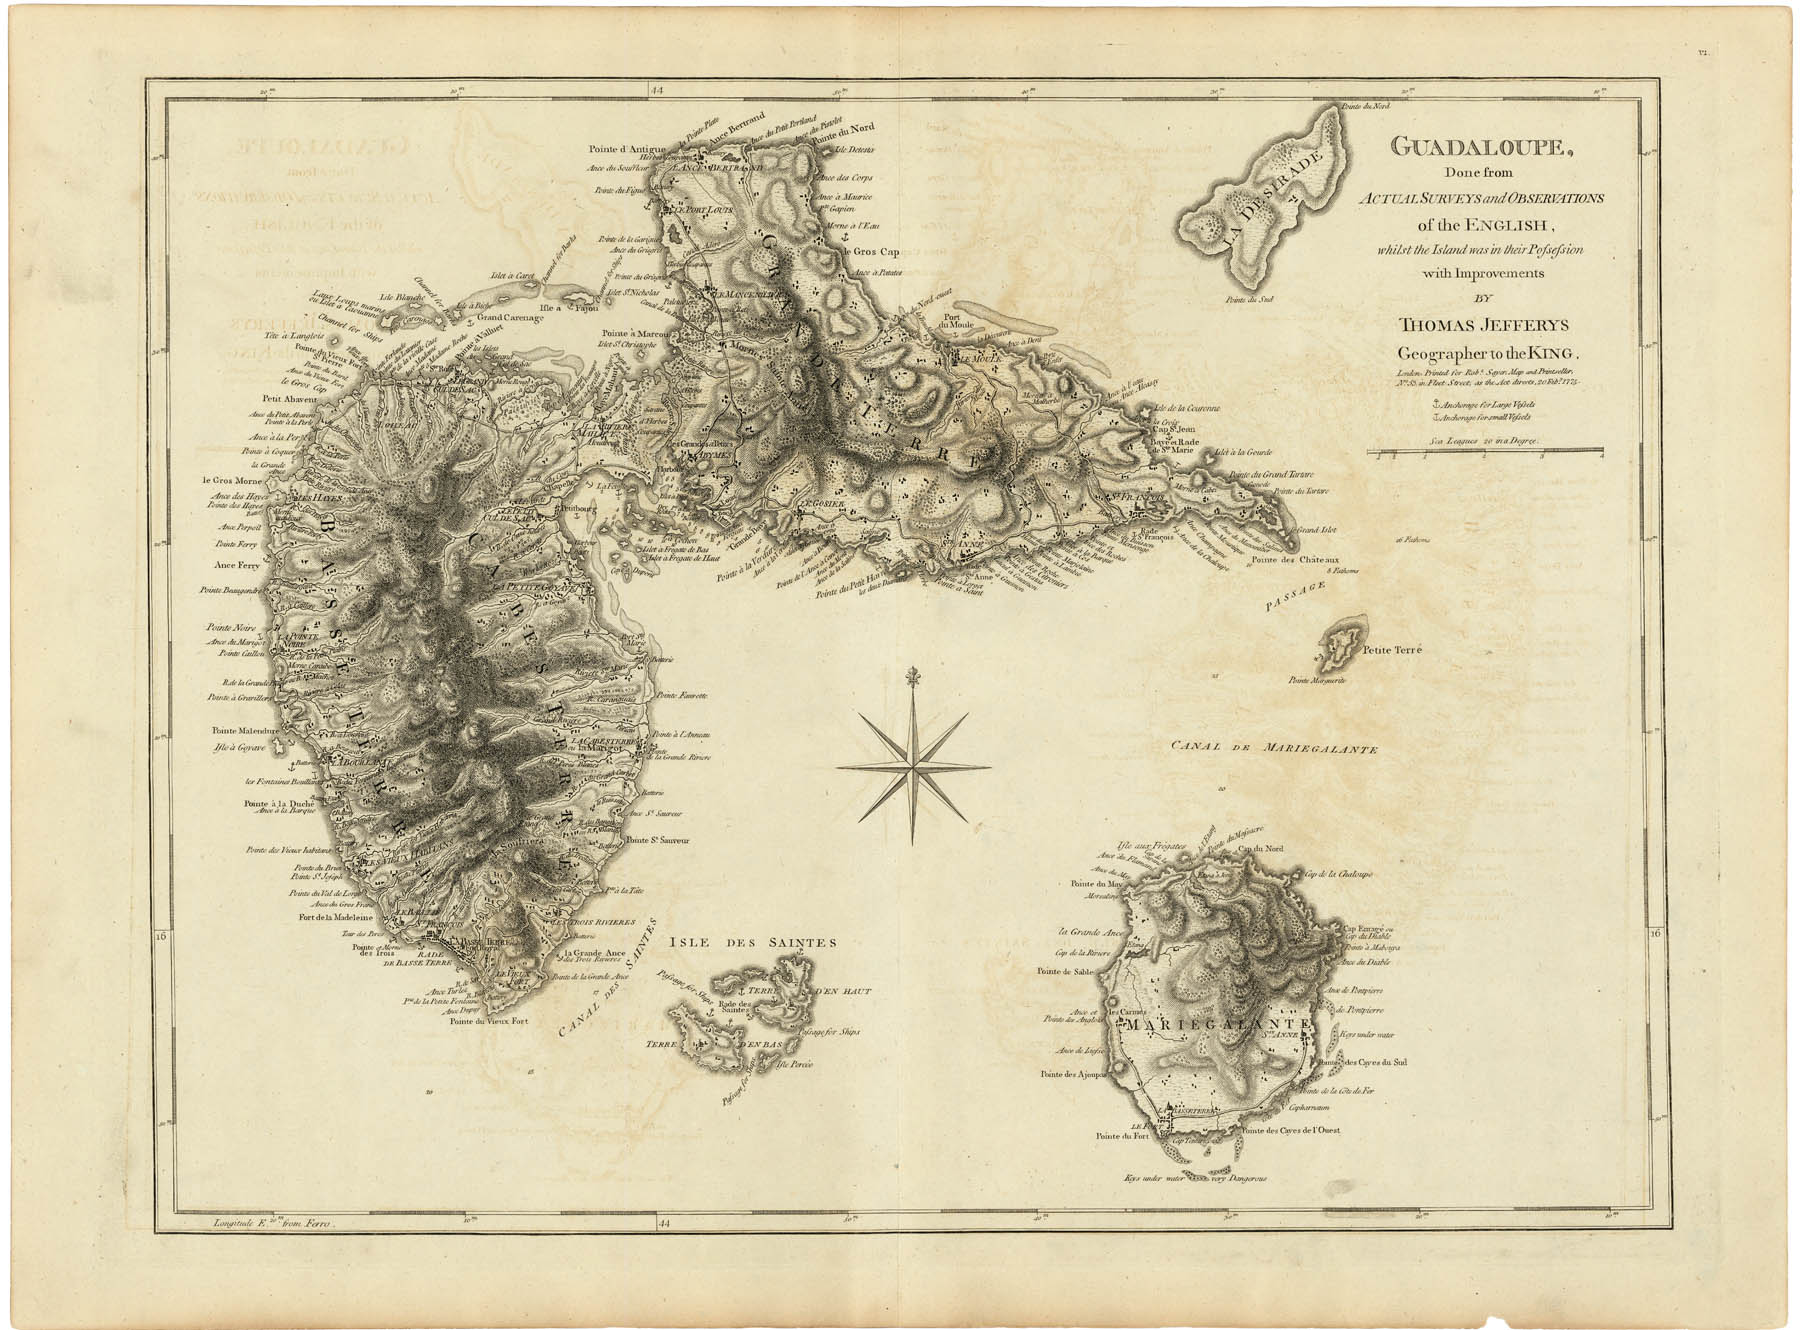 Guadaloupe, Done from Actual Surveys and Observations of the English, whilst the Island was in their Possession... .